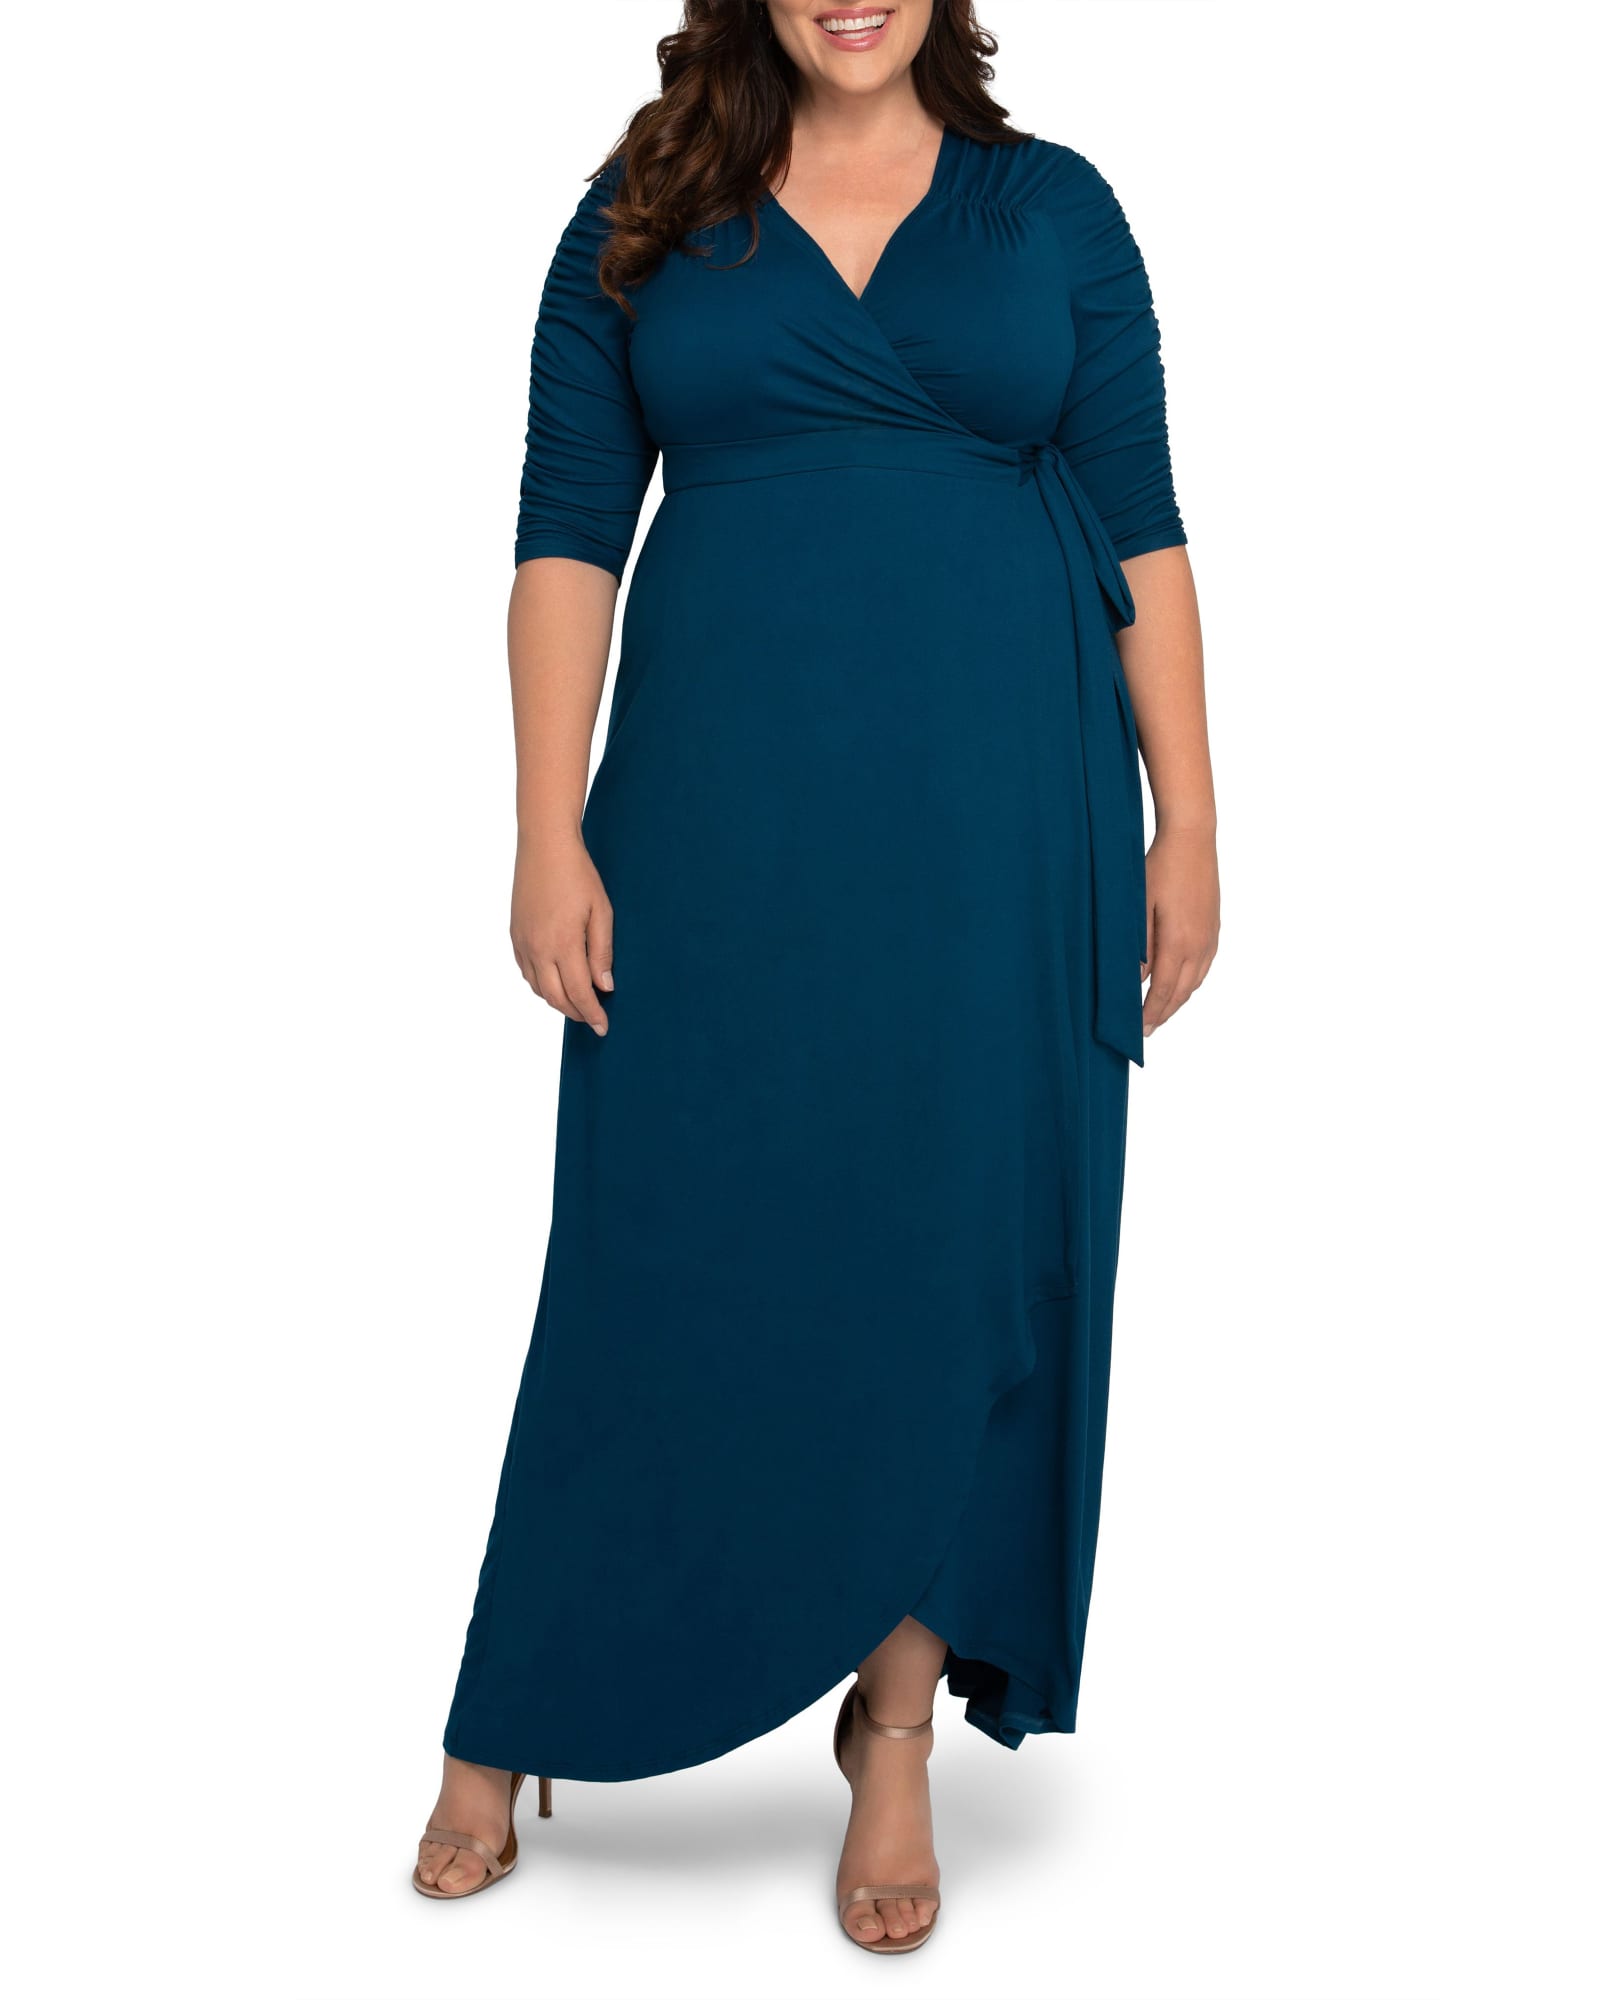 Plus Size Swimsuit Cover Up Dress